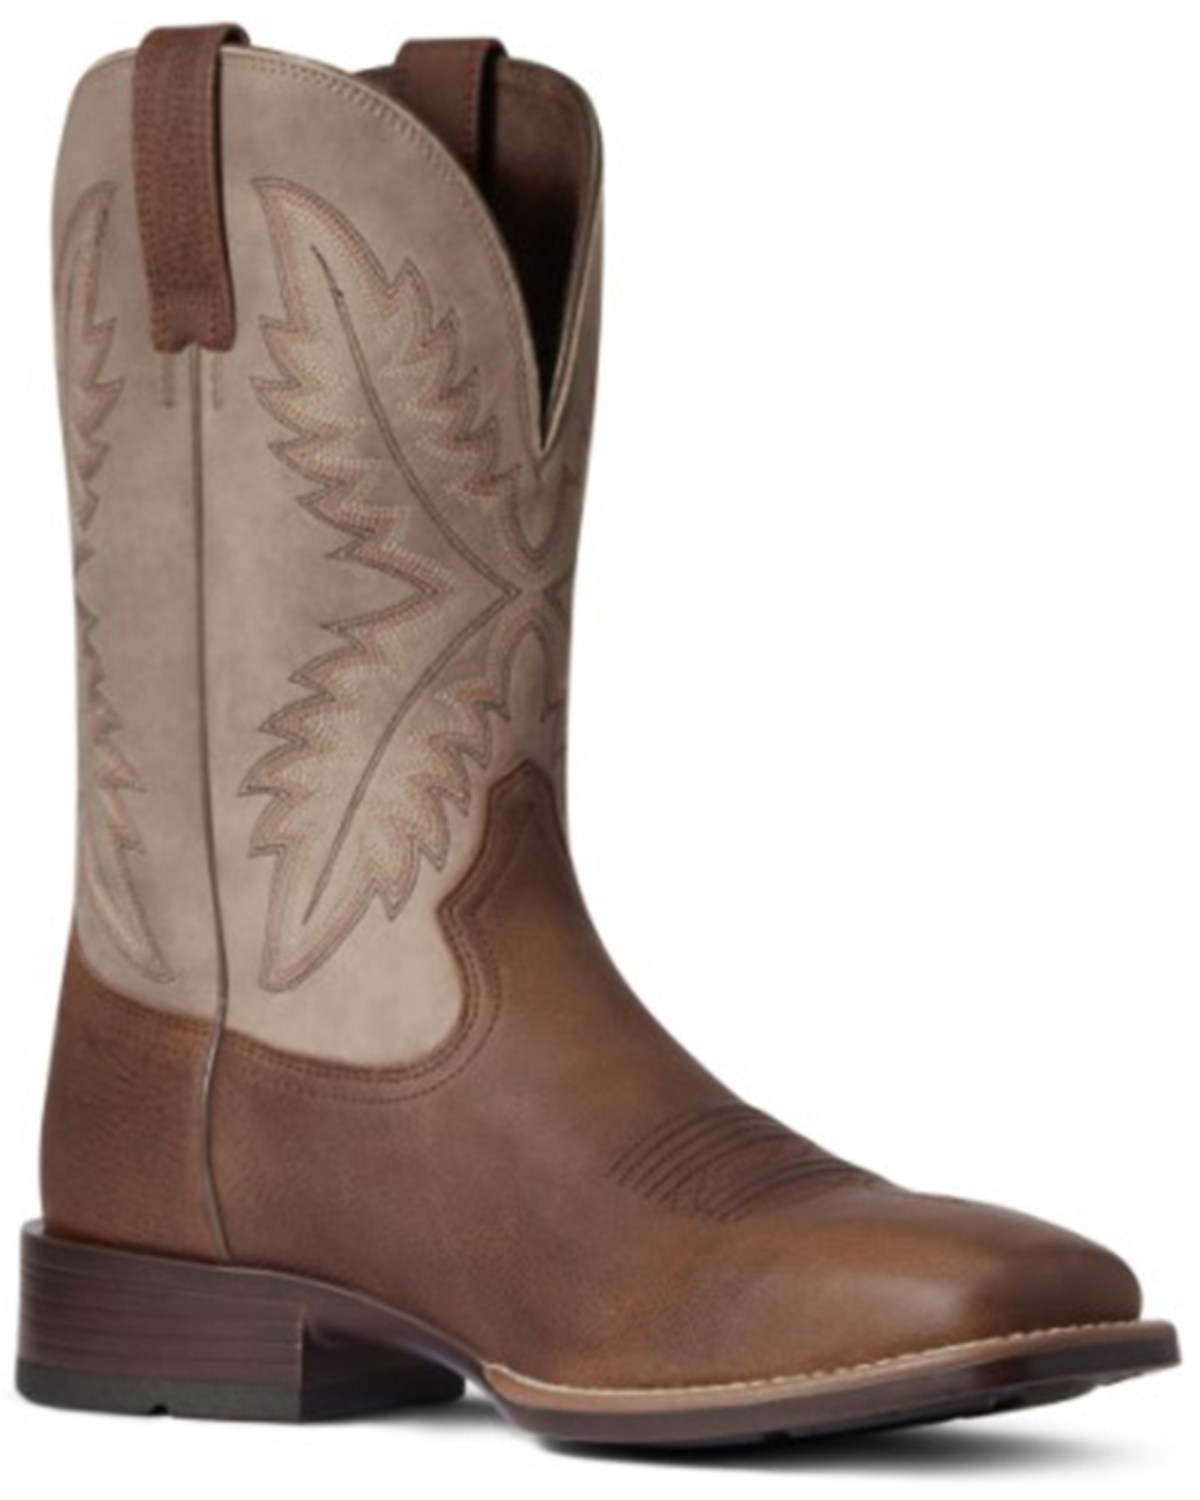 Ariat Men's Barrel Rawly Ultra Western Performance Boots - Broad Square Toe